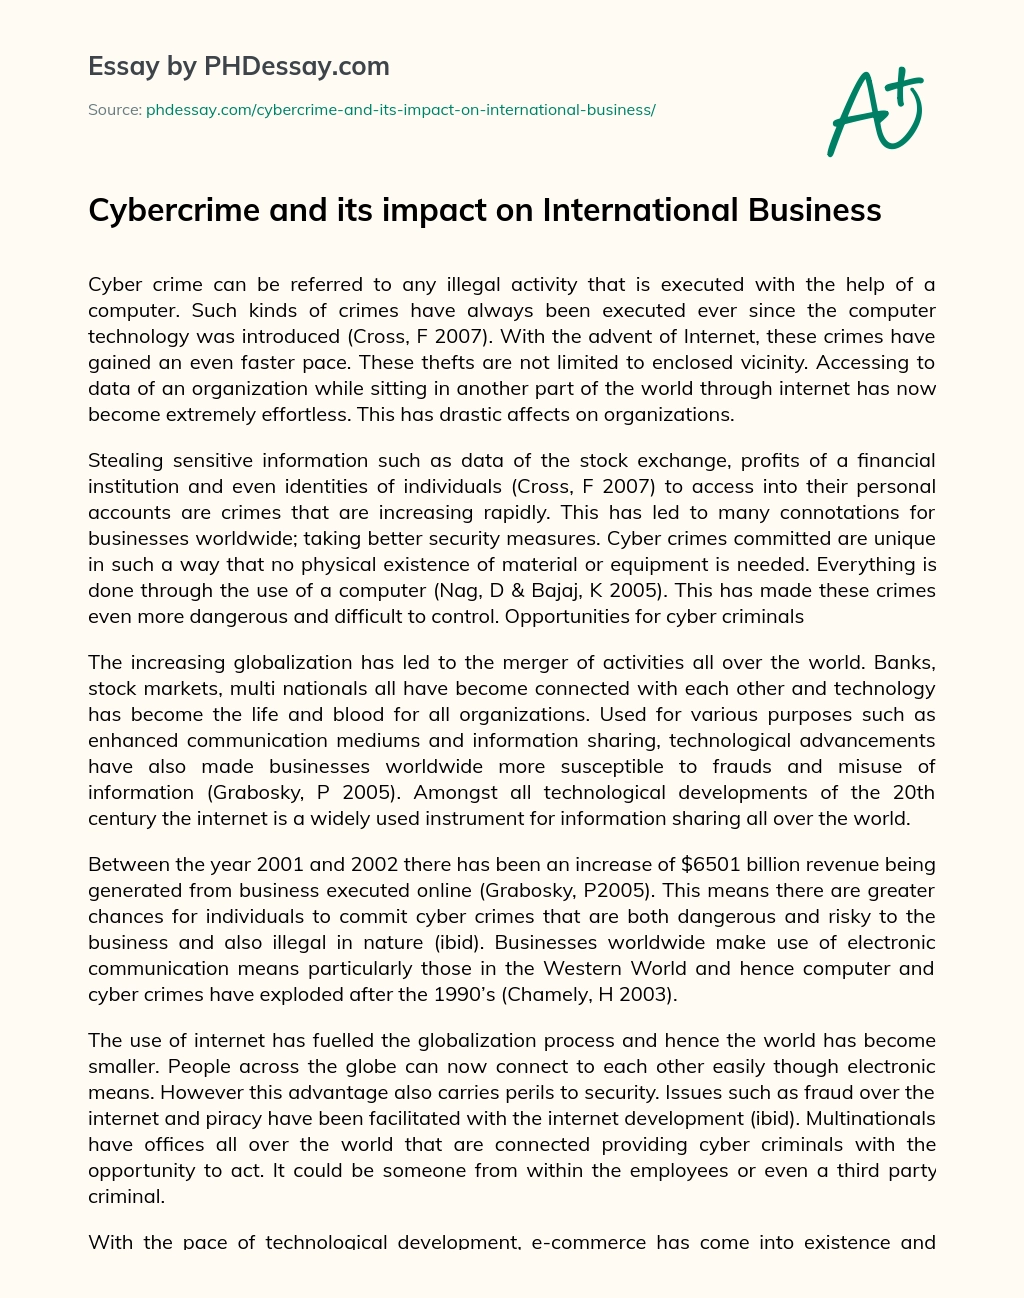 Cybercrime and its impact on International Business essay